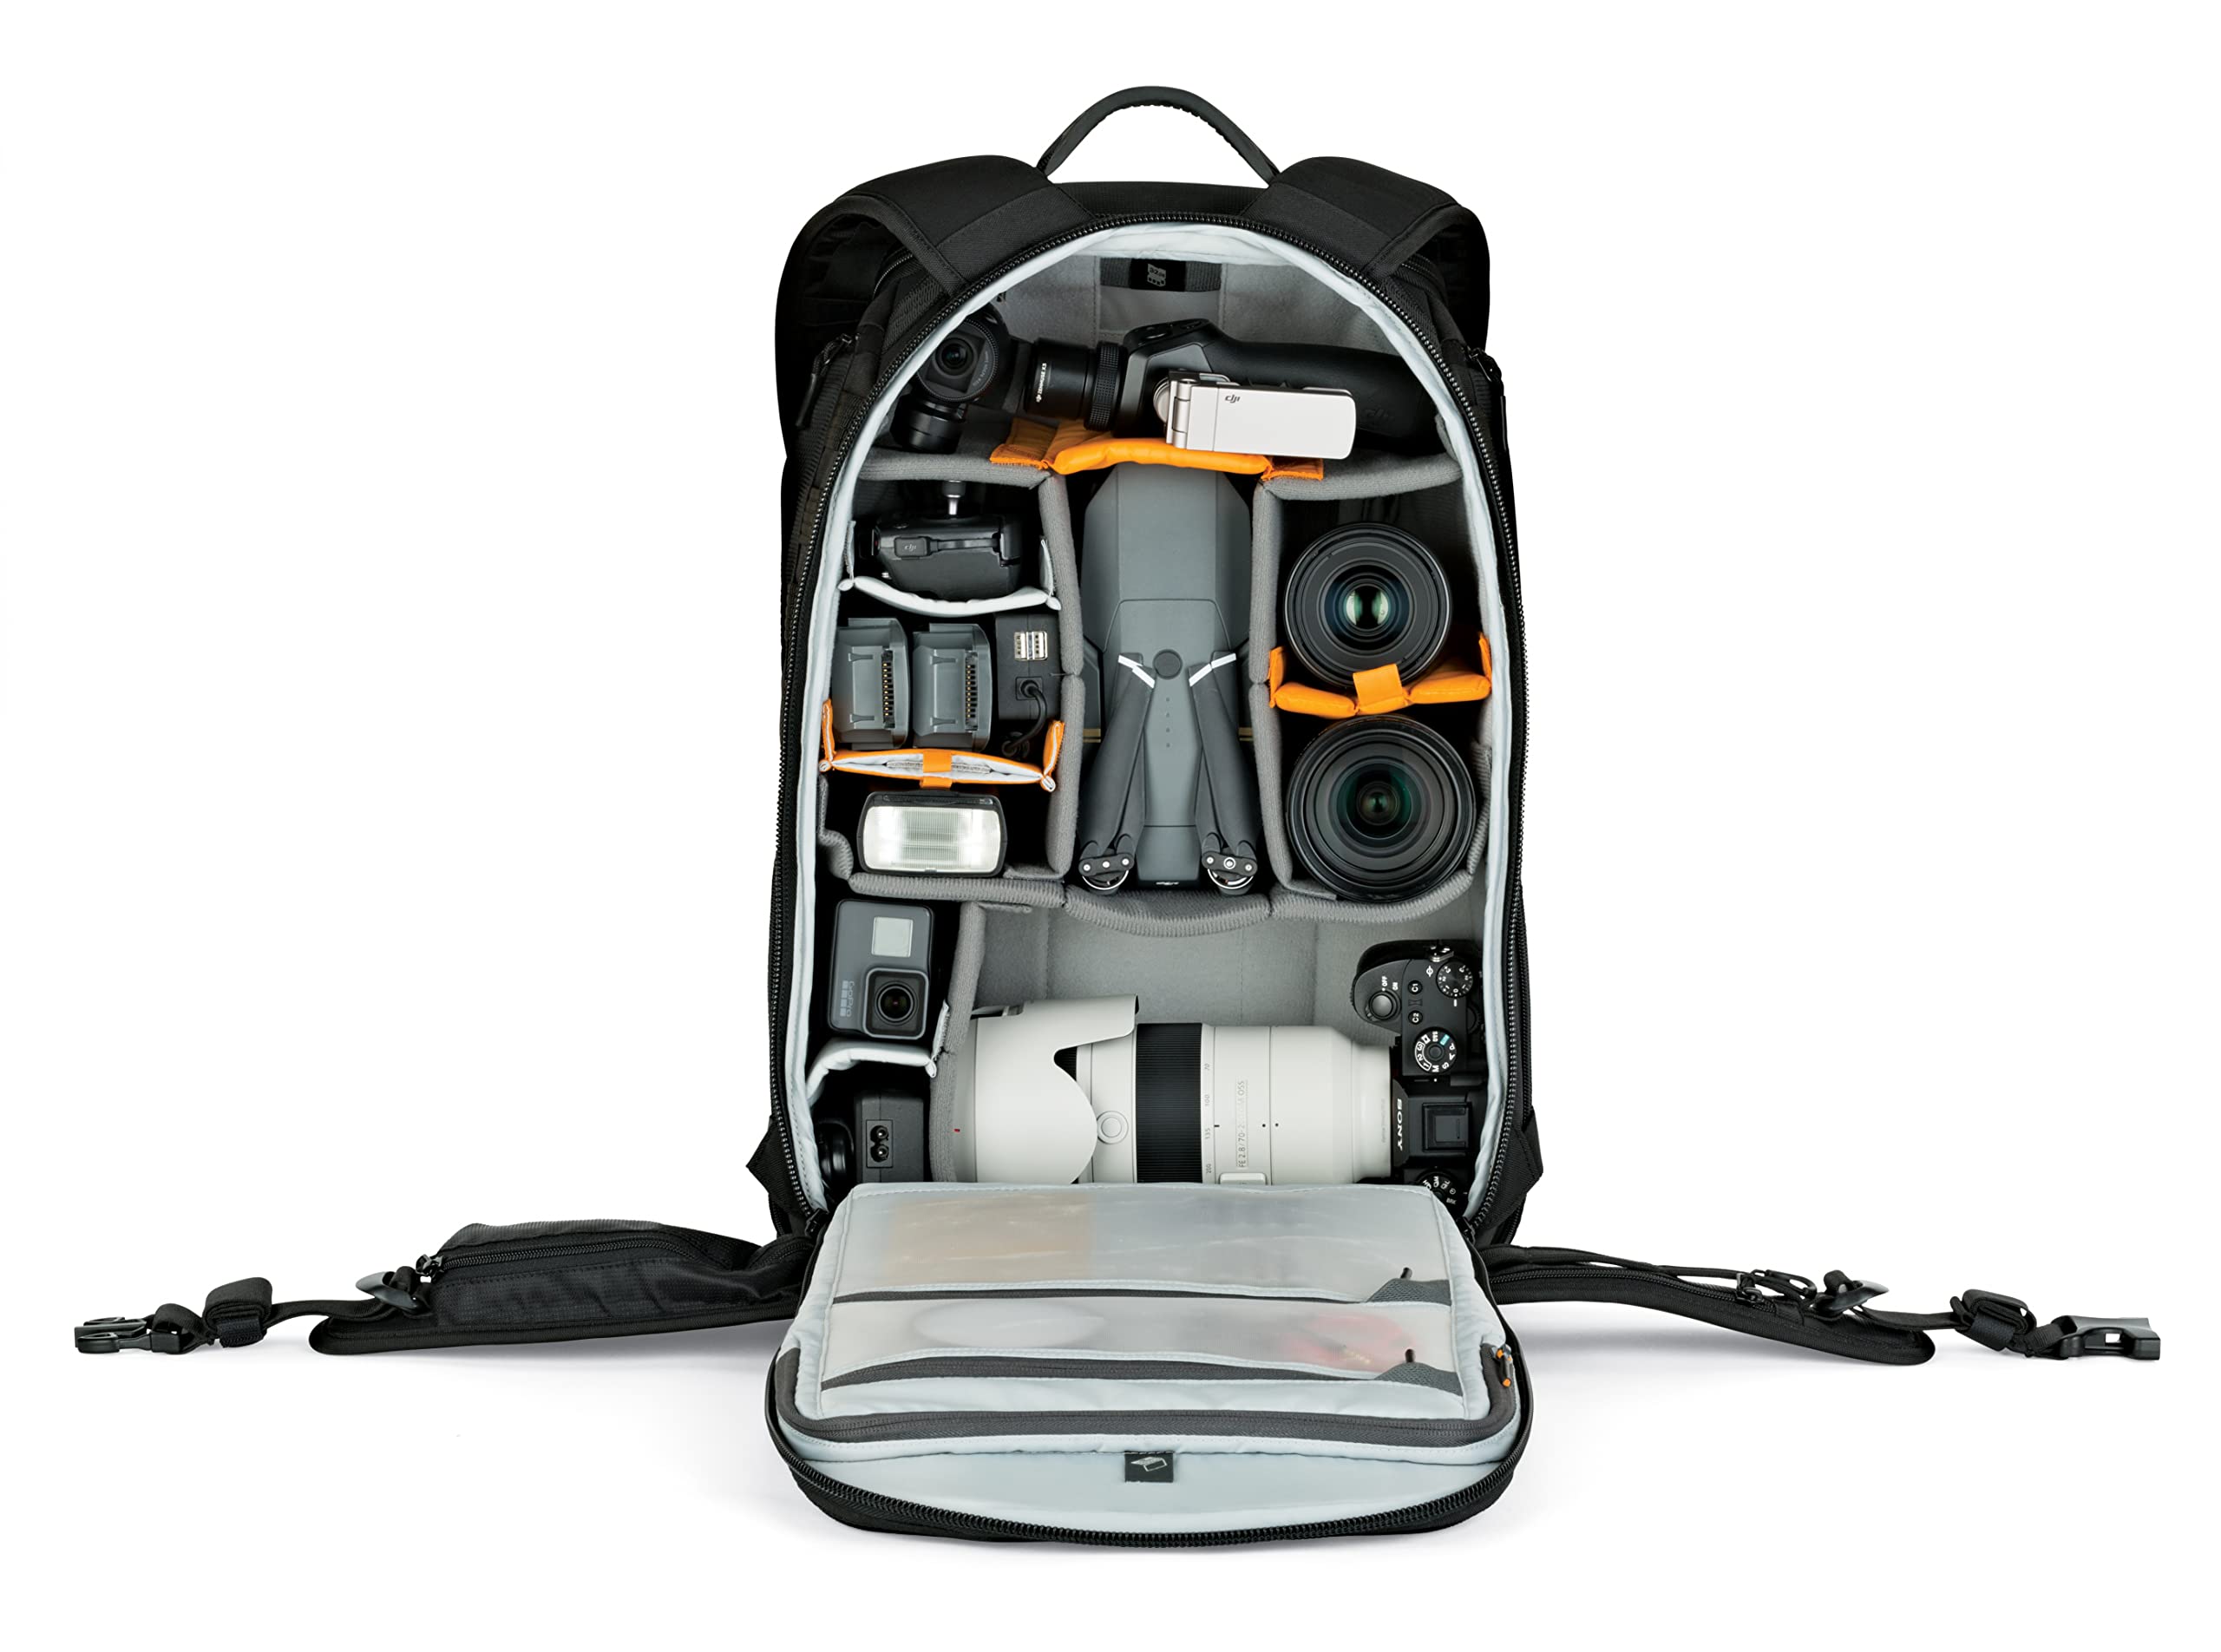 Lowepro ProTactic 450 AW II Black Pro Modular Backpack with All Weather Cover, Camera Bag for Professional Use, for Laptop Up to 15